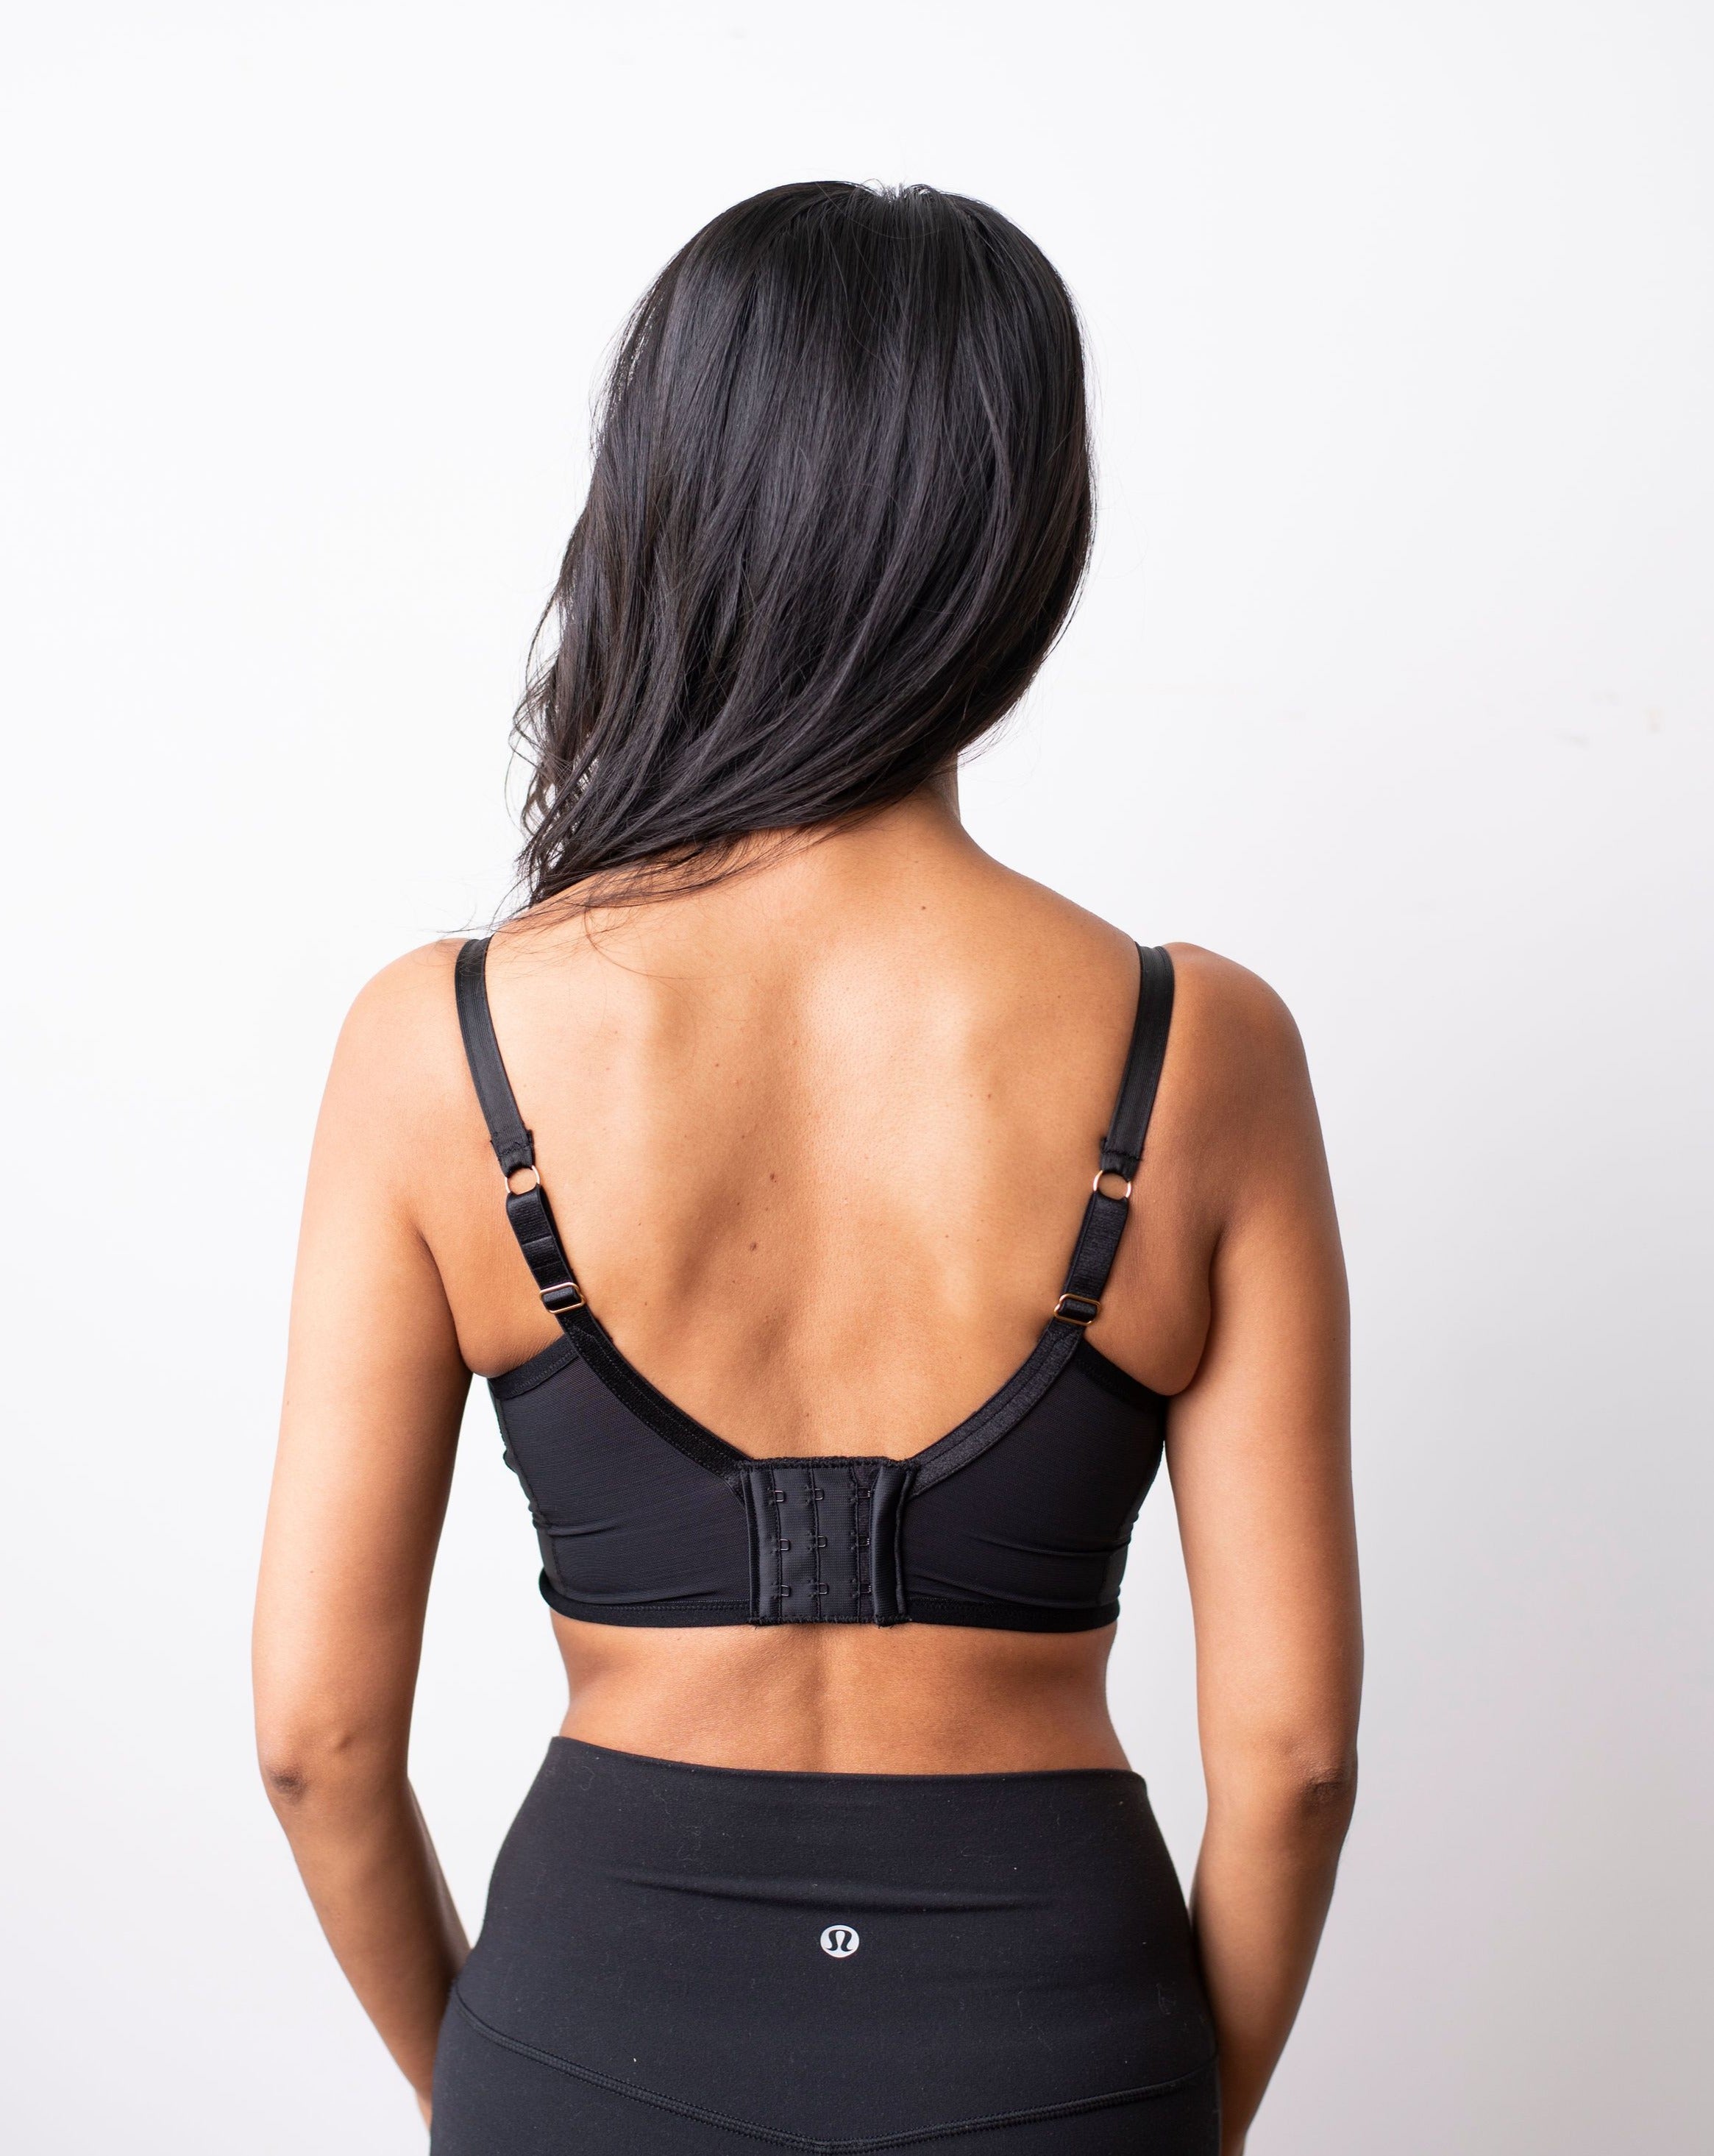 Back shot of the sheer, wire free, black bra. Shot against a white background.